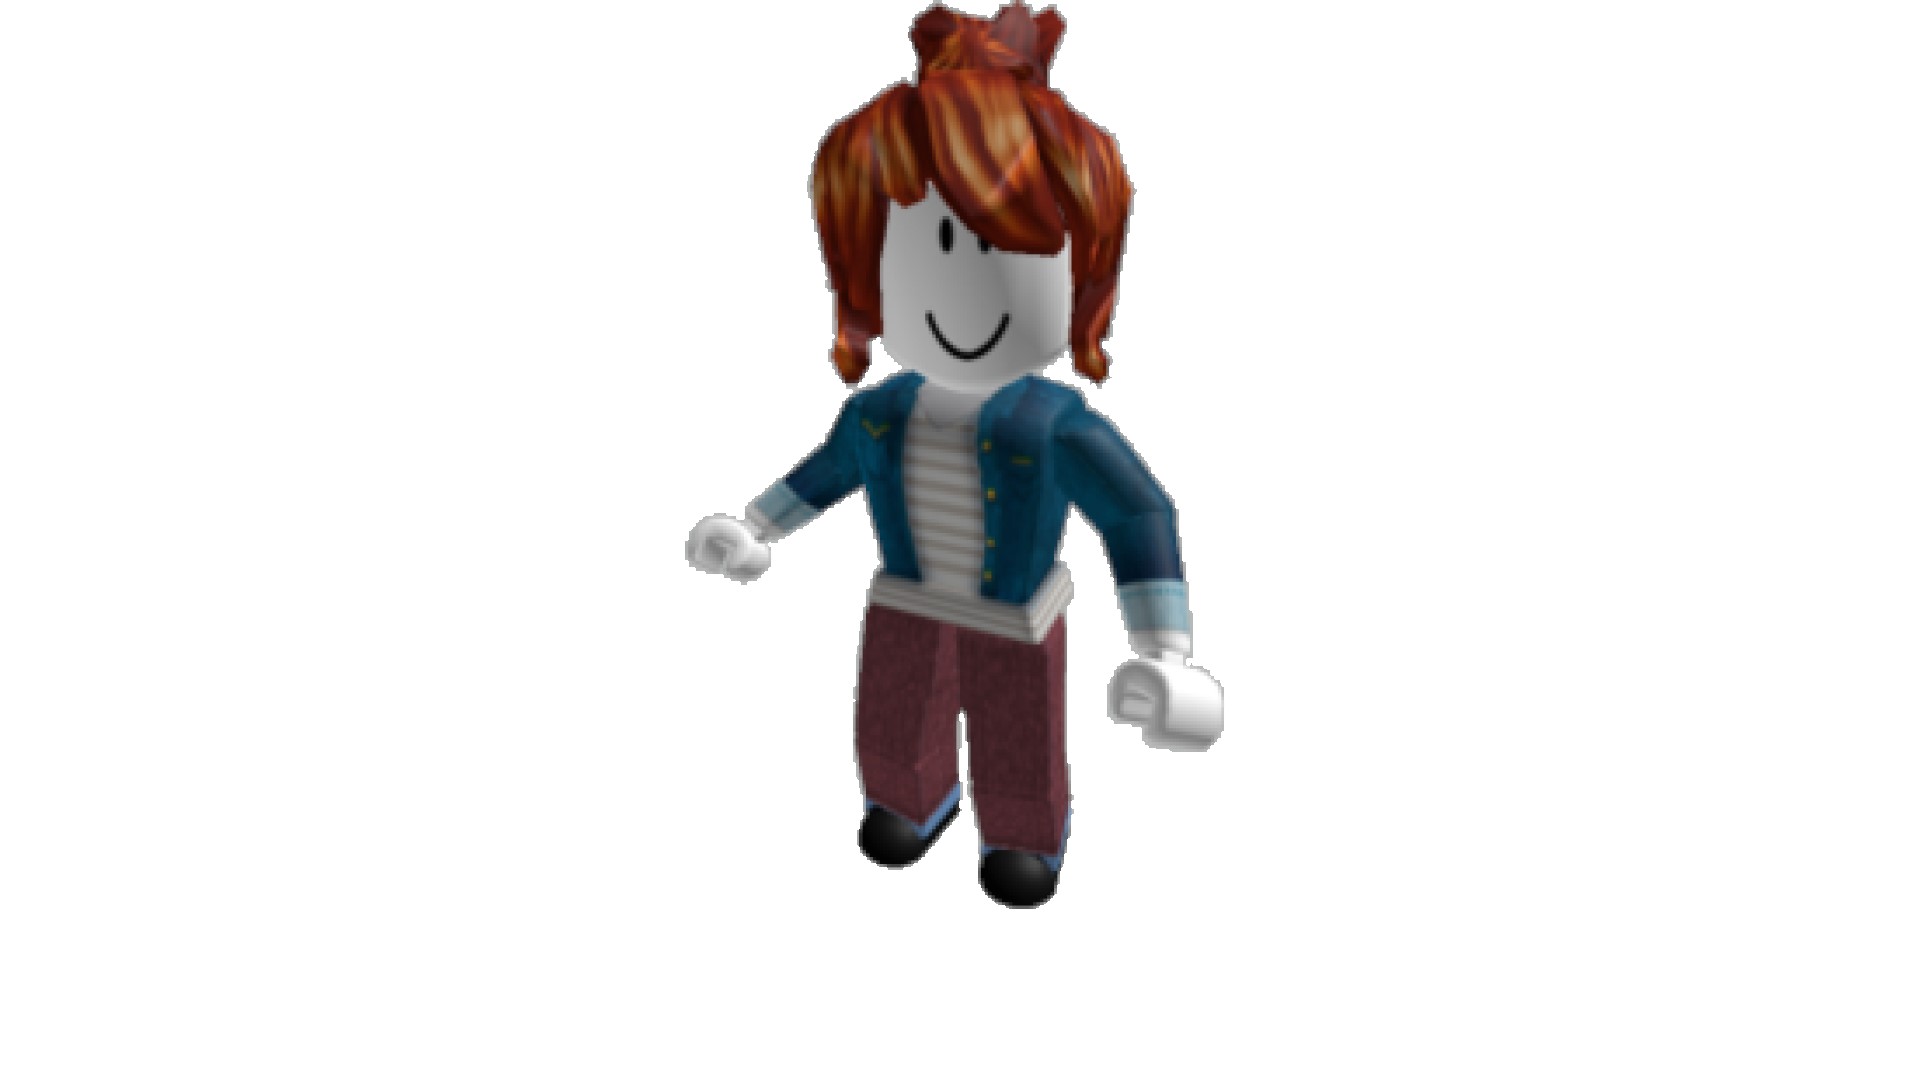 Roblox Noob: What does this mean?